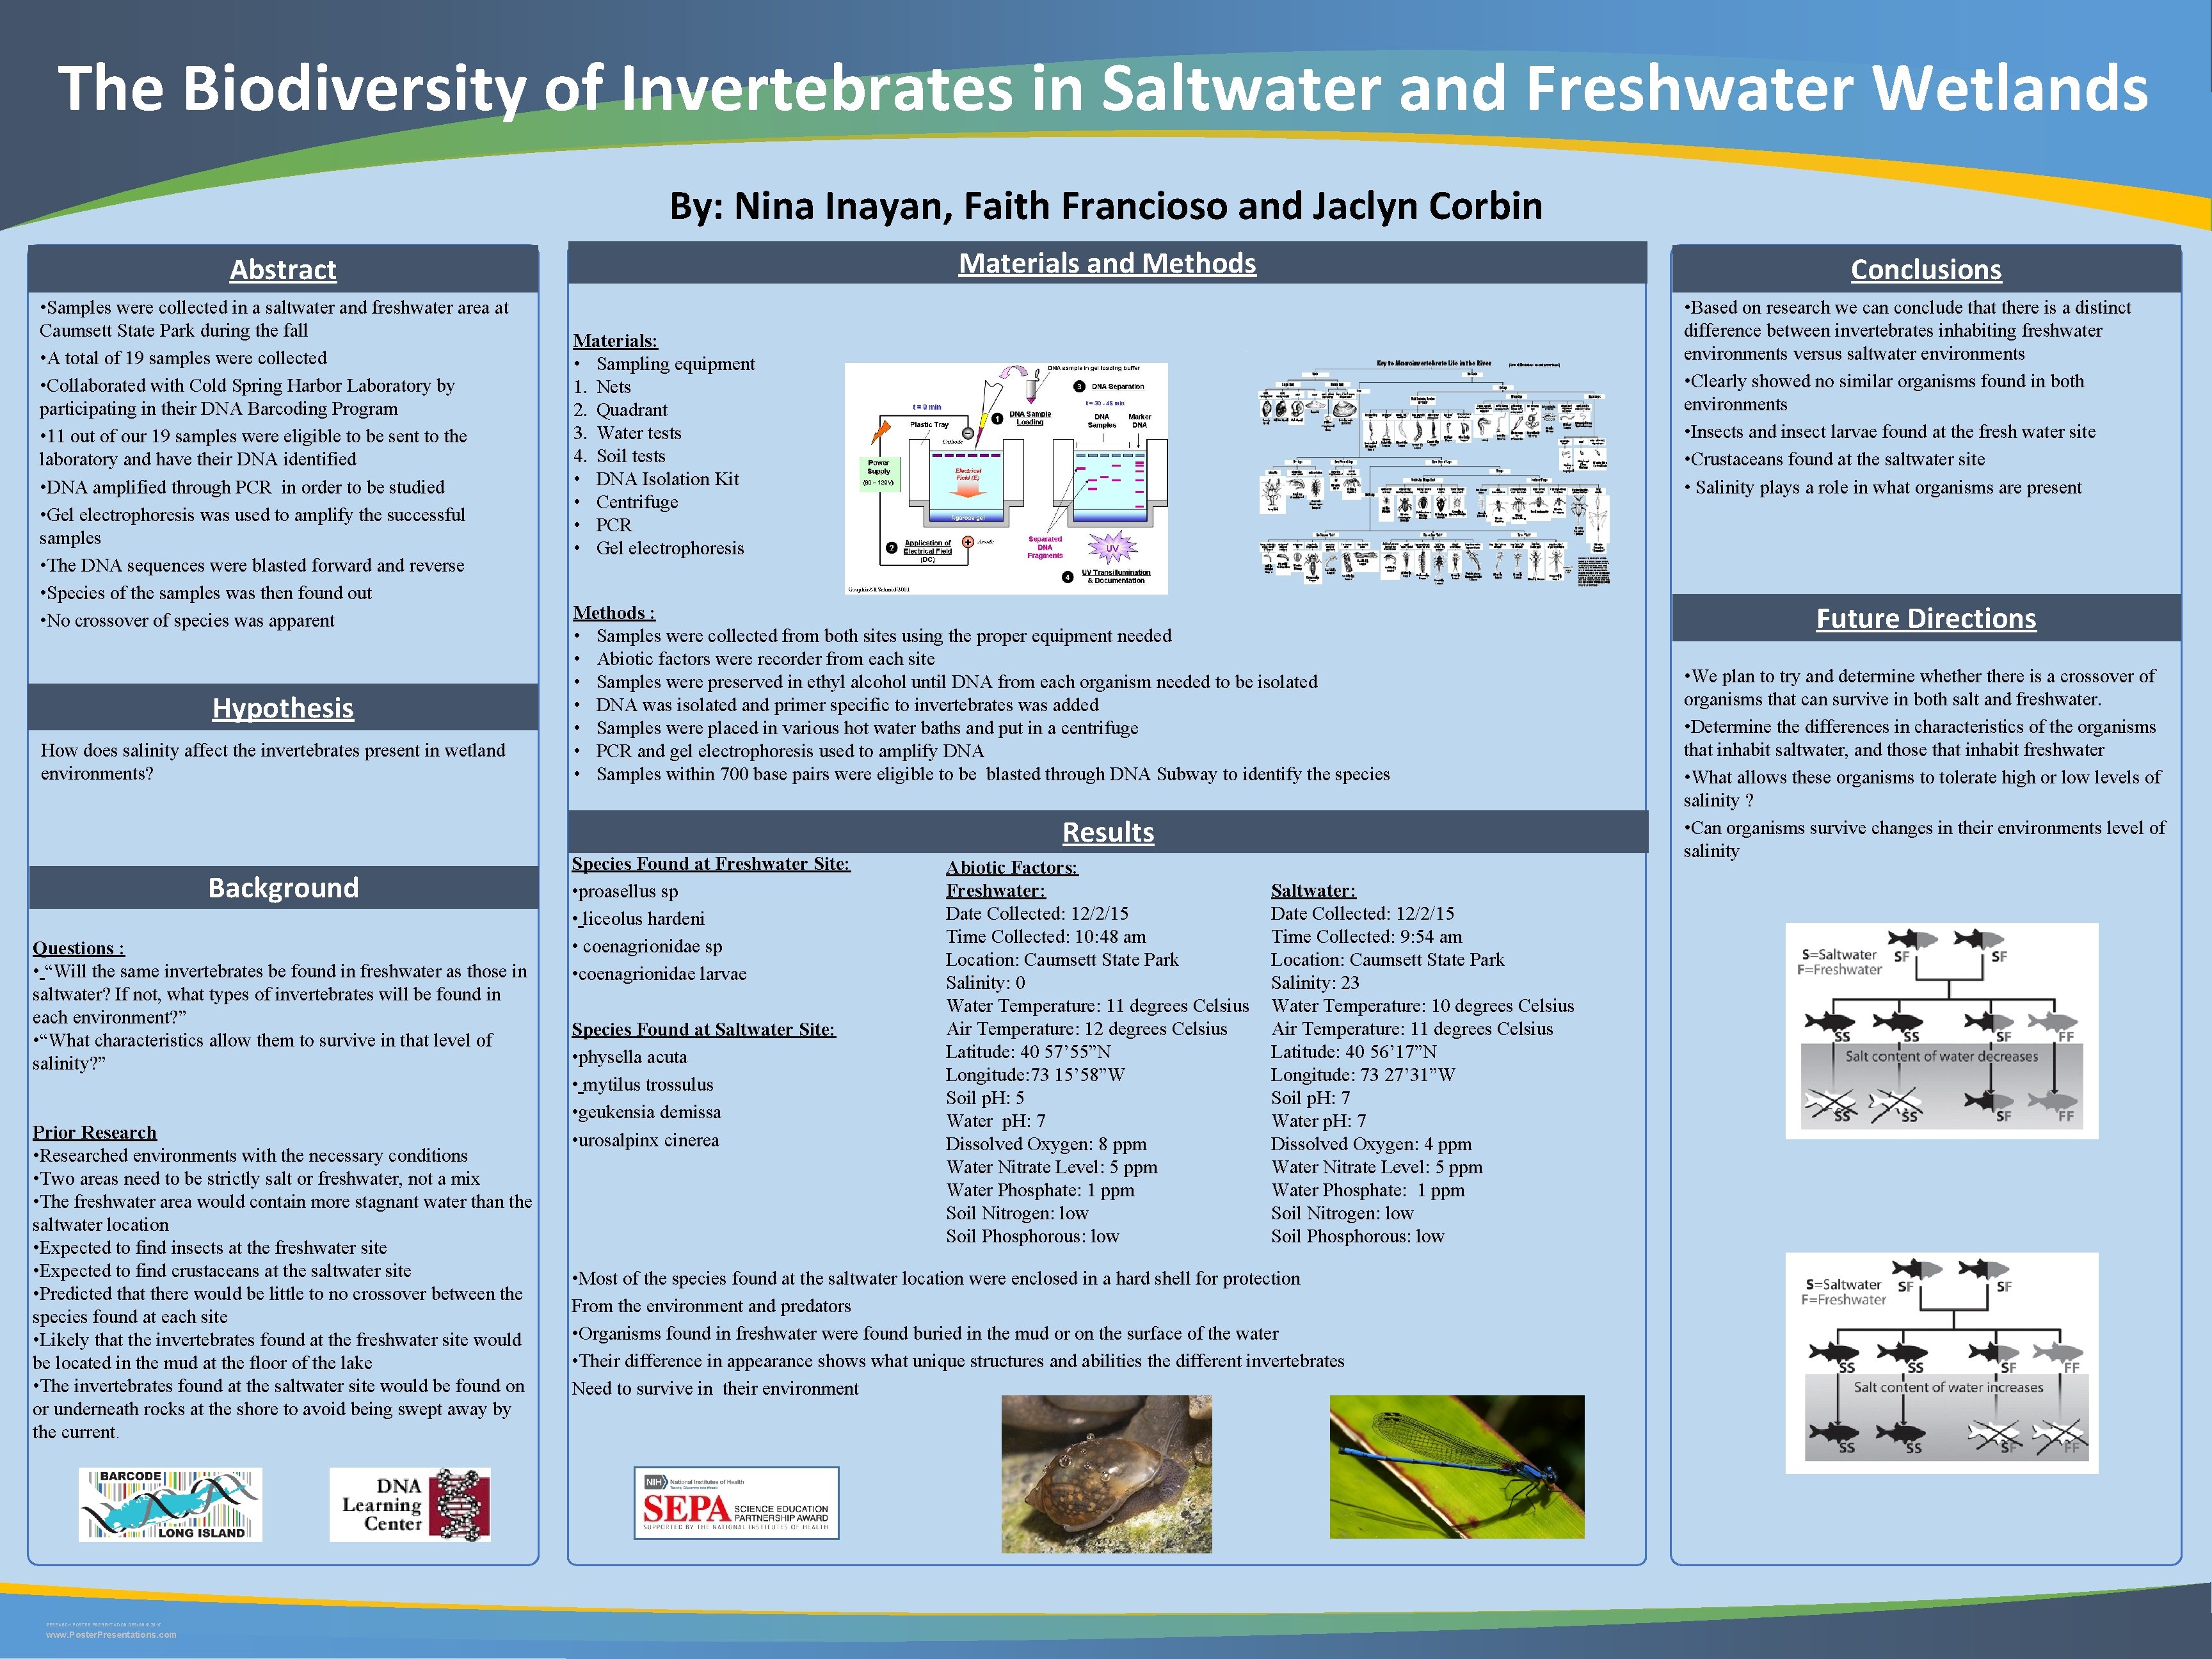 The Biodiversity of Invertebrates in Saltwater and Freshwater Wetlands By: Nina Inayan, Faith Francioso